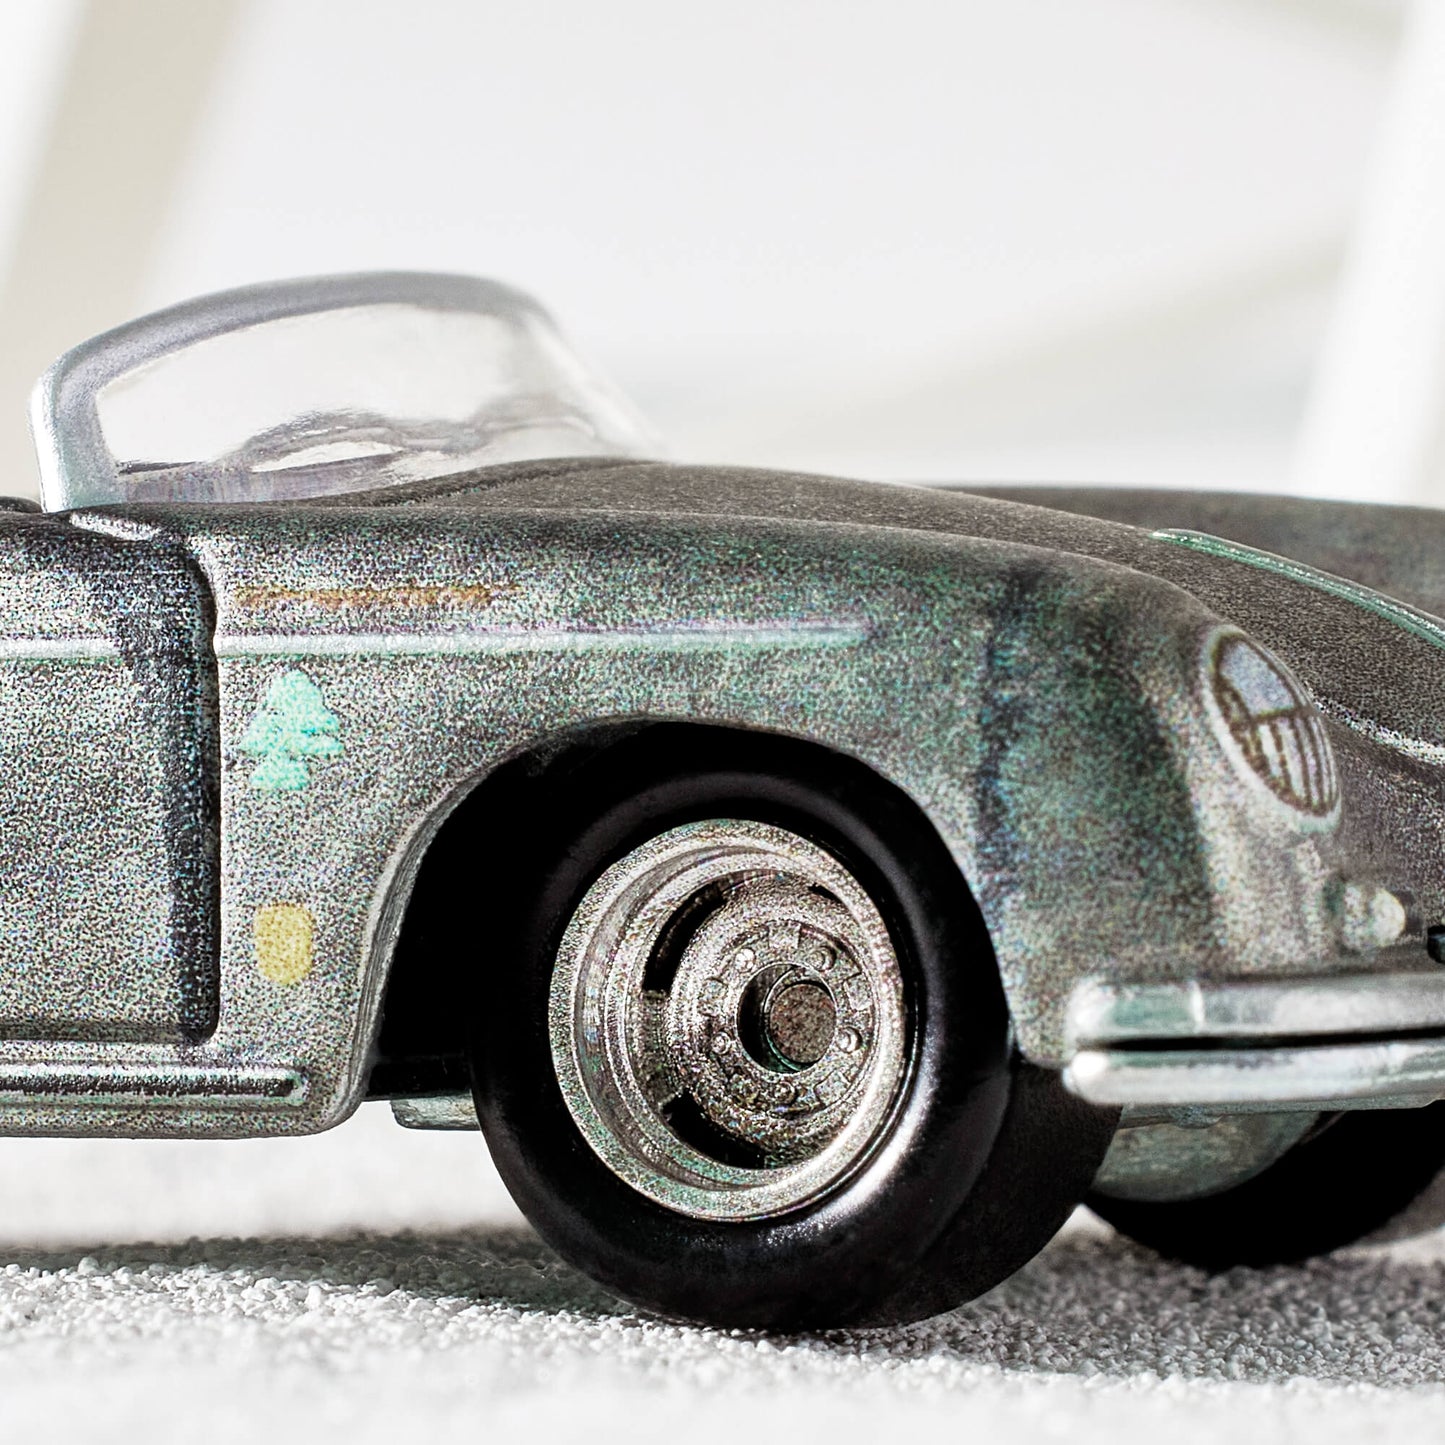 Daniel Arsham x Hot Wheels Porsche 356 “Bonsai” Speedster, 2023 Features: Sculpted crystallized erosions Body Color: Weathering effect to match ZAMAC color Body Type: ZAMAC Chassis: ZAMAC Wheels: Real Riders deep dish wheels with wash/wipe weathering effect Window Color: Clear Interior Color: Plastic replica of 1:1 version’s indigo-dyed Japanese textiles Scale 1:64 Includes sealing label and Certificate of Authenticity Packaged in a collector display case with simulated concrete base.